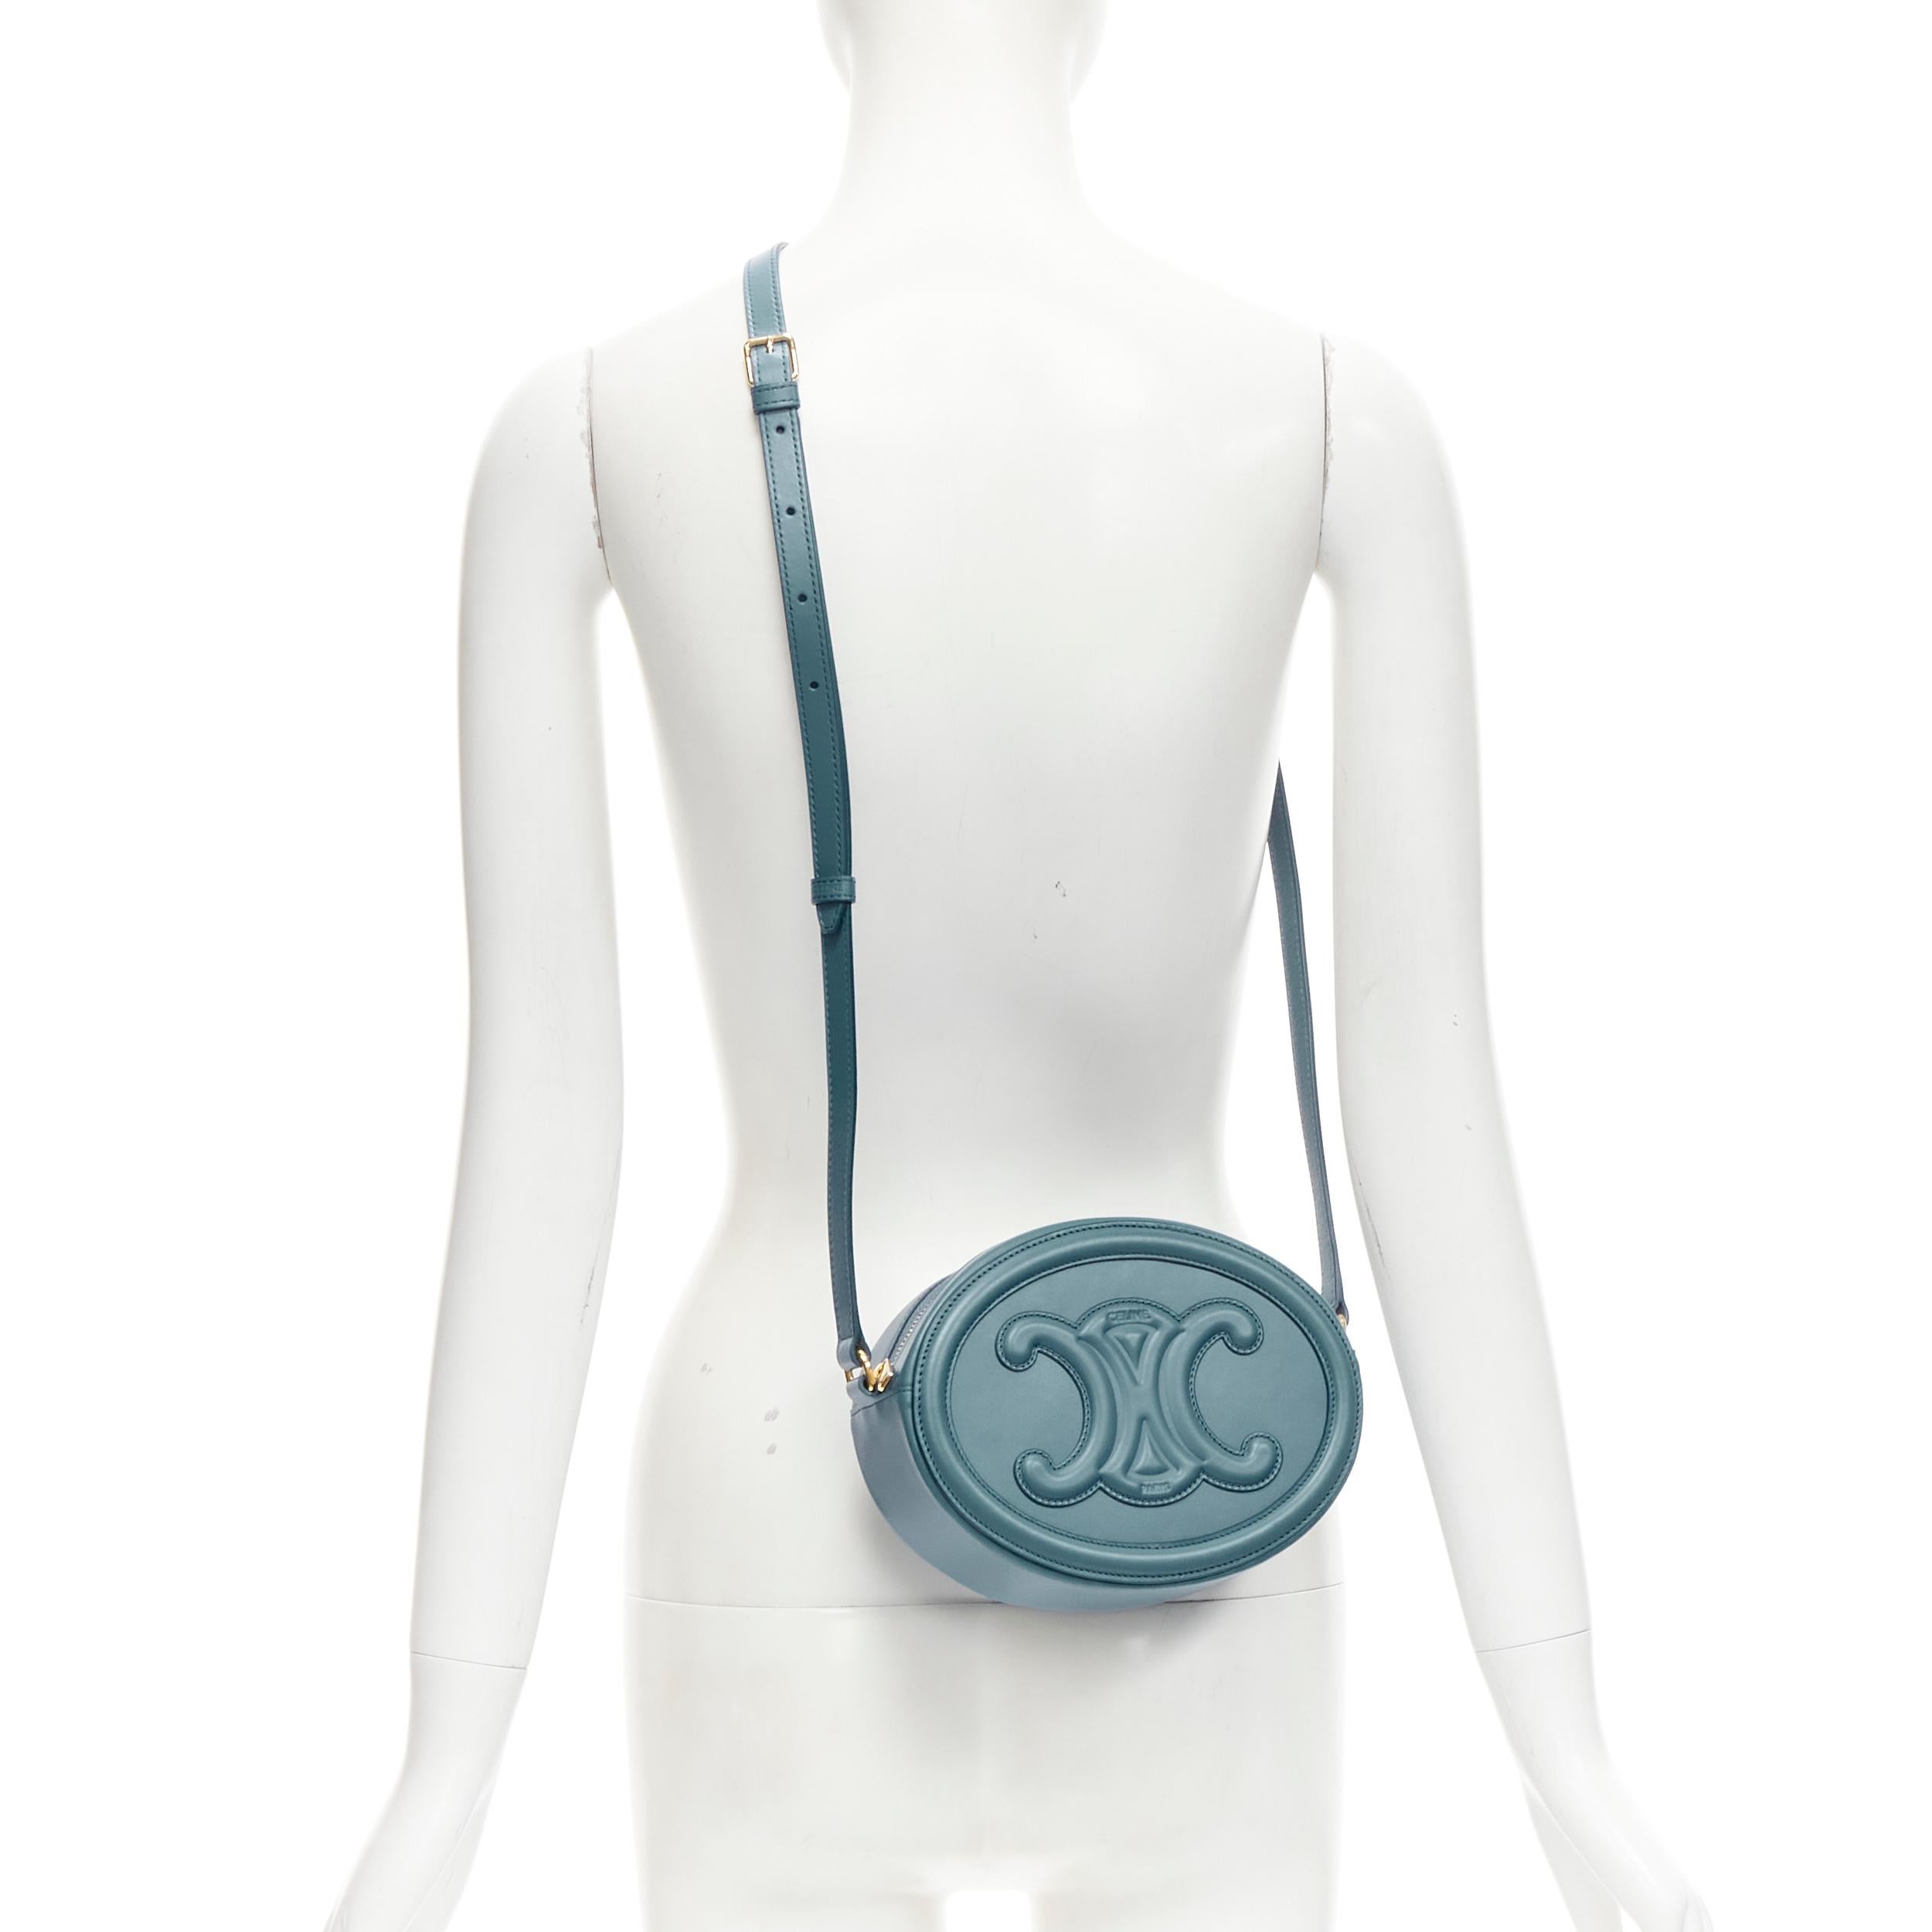 new CELINE 2023 Oval Purse blue leather Triomphe logo crossbody bag
Reference: JYLM/A00033
Brand: Celine
Model: Crossbody Oval Purse
Collection: 2023
Material: Leather
Color: Blue
Pattern: Solid
Closure: Zip
Lining: Blue Suede
Extra Details: